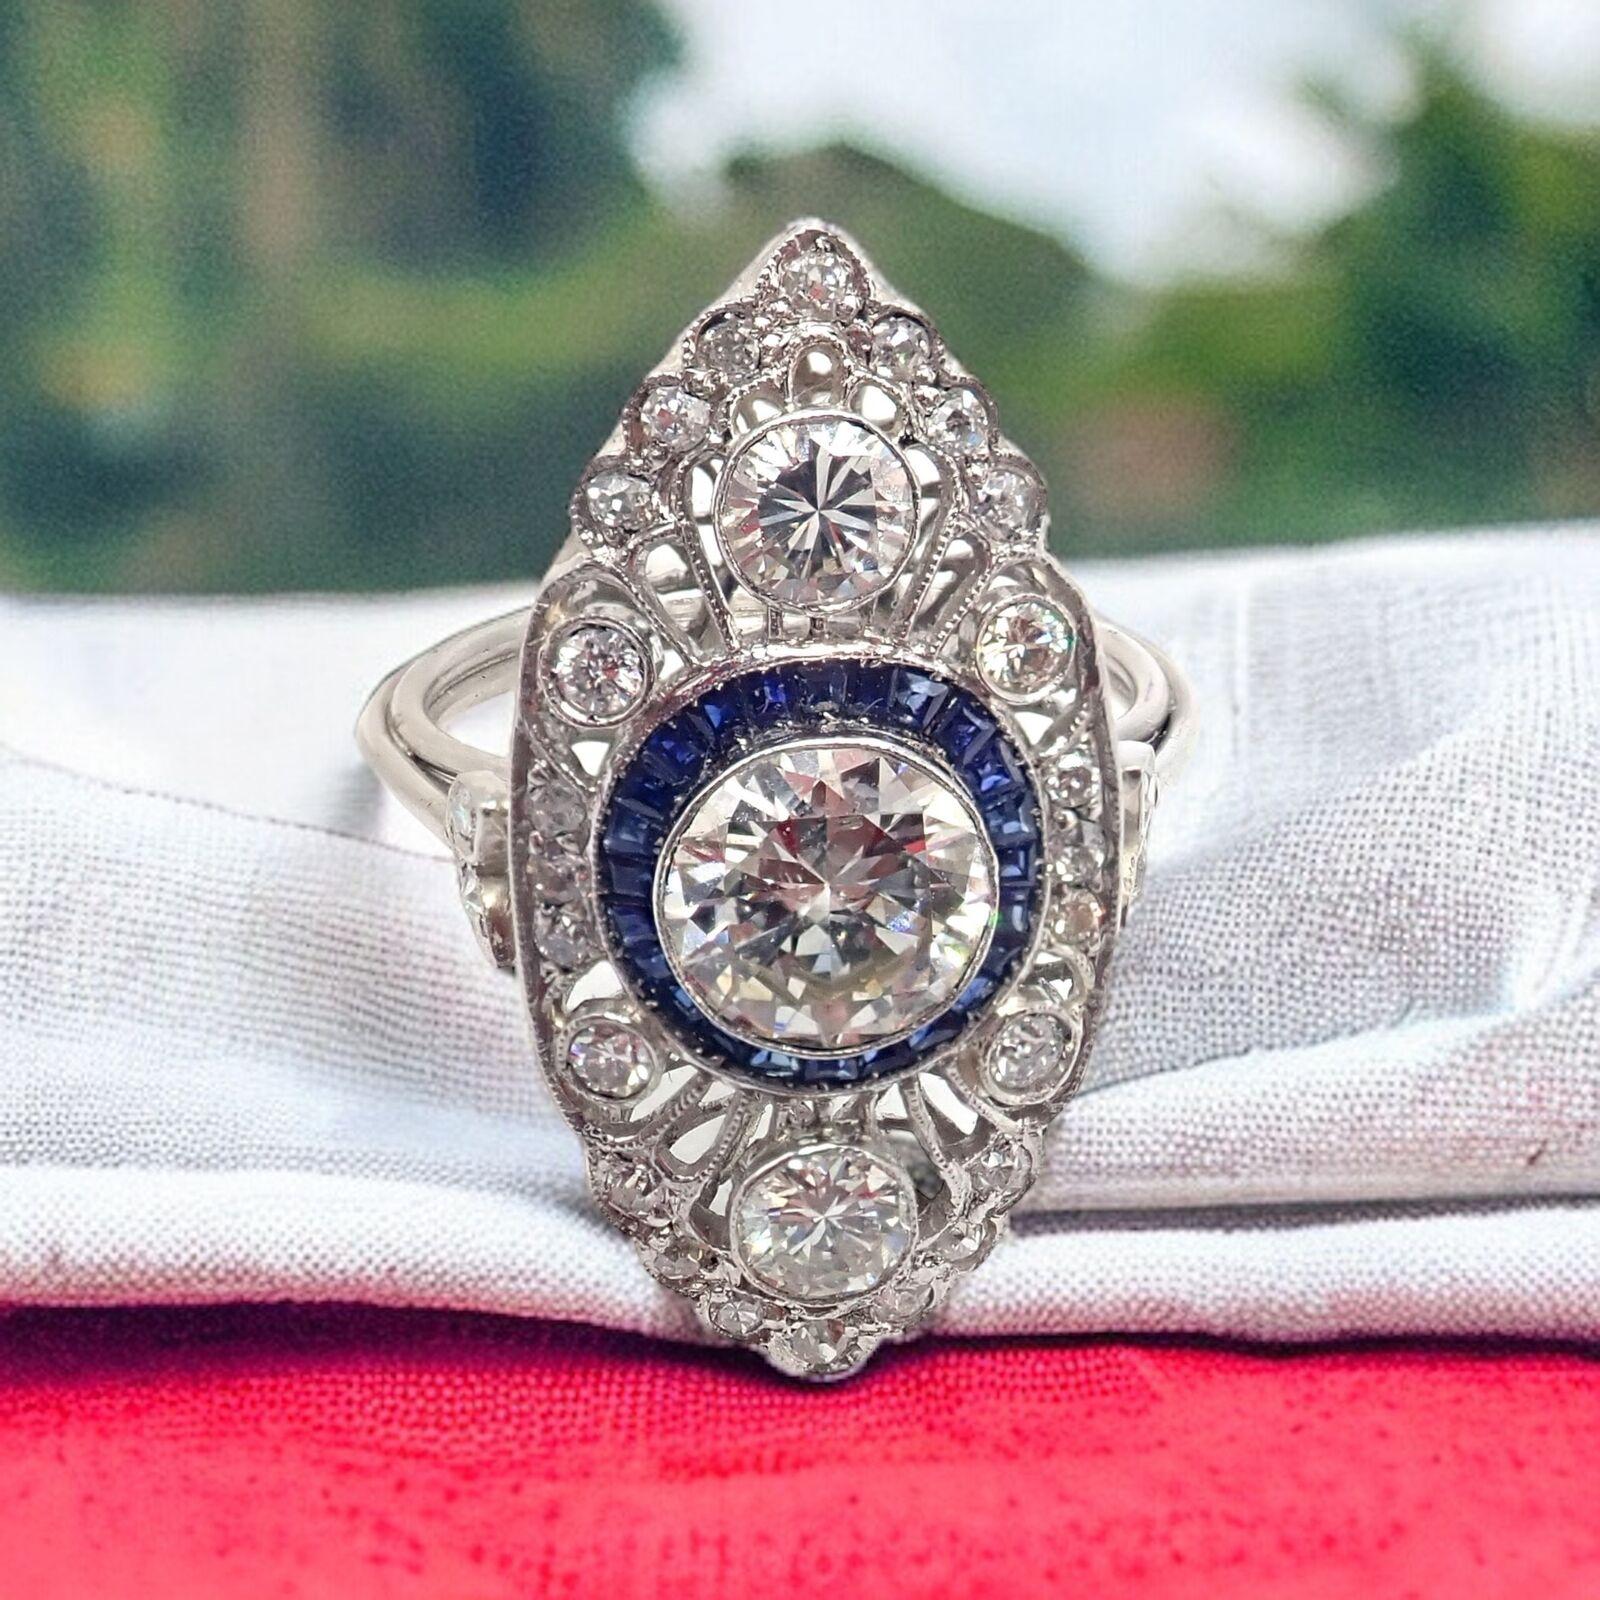 Platinum Art Deco Diamond And Sapphire Filigree Ring.
With 1 Old Euro cut diamonds approximately 1.04ct
Rest of diamonds equal approximately 0.76ct
Sapphires - Approximately 0.65ct
The Vintage Estate Platinum Art Deco Filigree Ring is a stunning